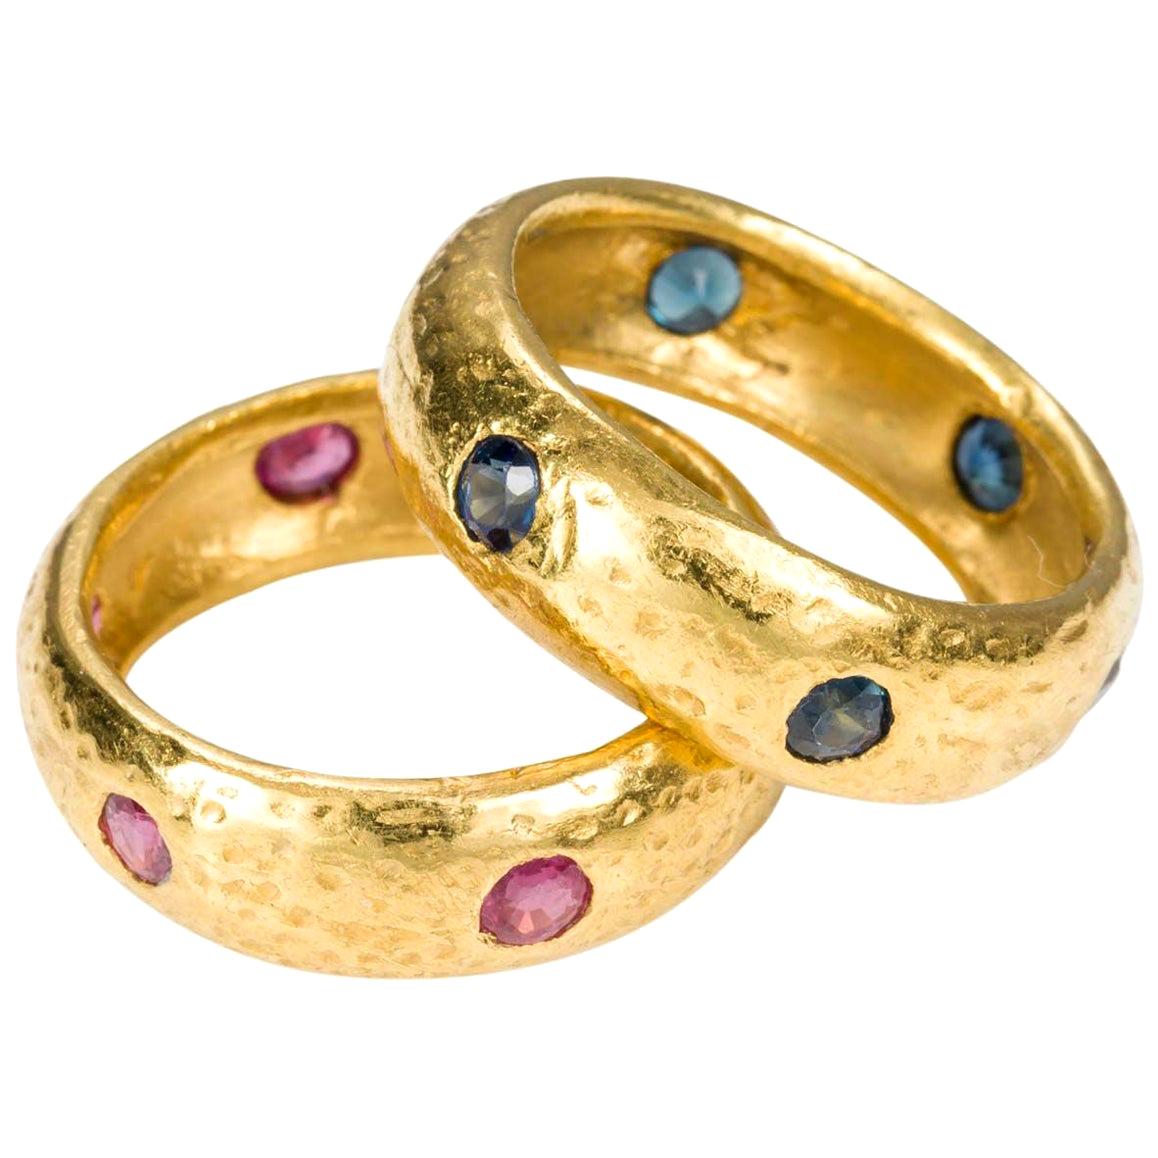 22 Karat Yellow Gold Sapphire and Ruby Hammer Band Rings - Size 6.75 For Sale